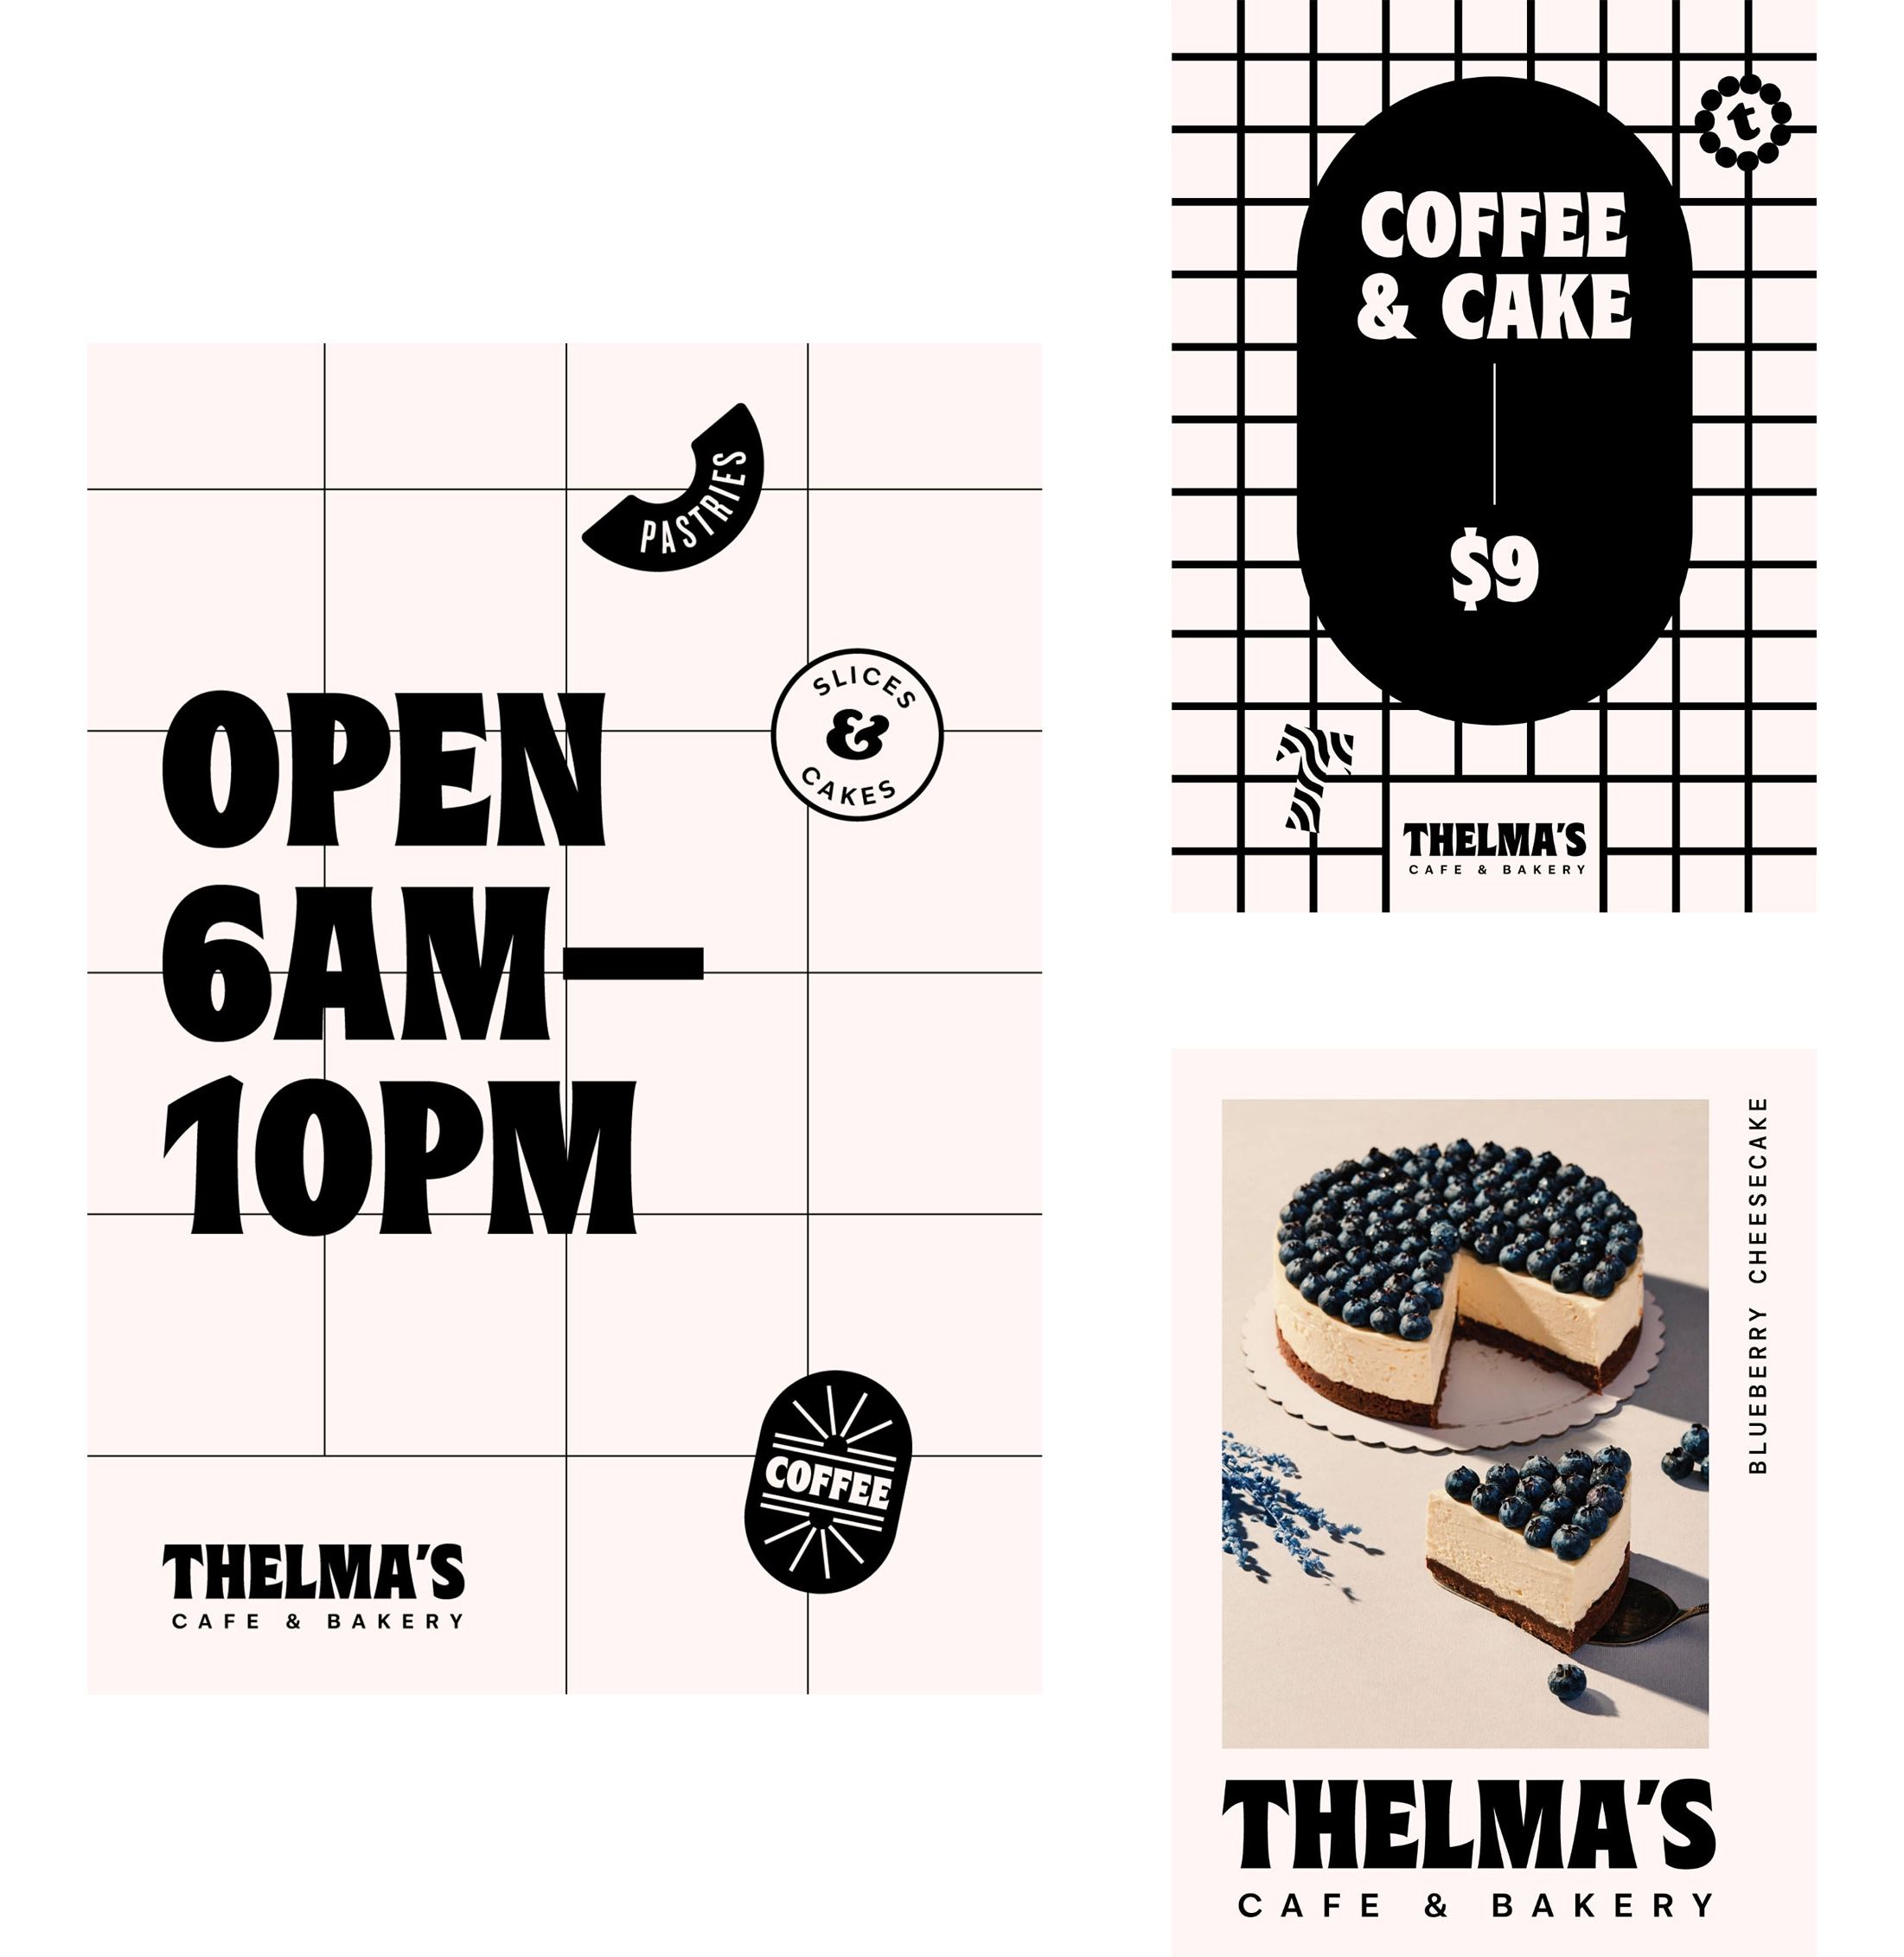 Thelma's Cafe & Bakery poster and print design by Kaliber Studio